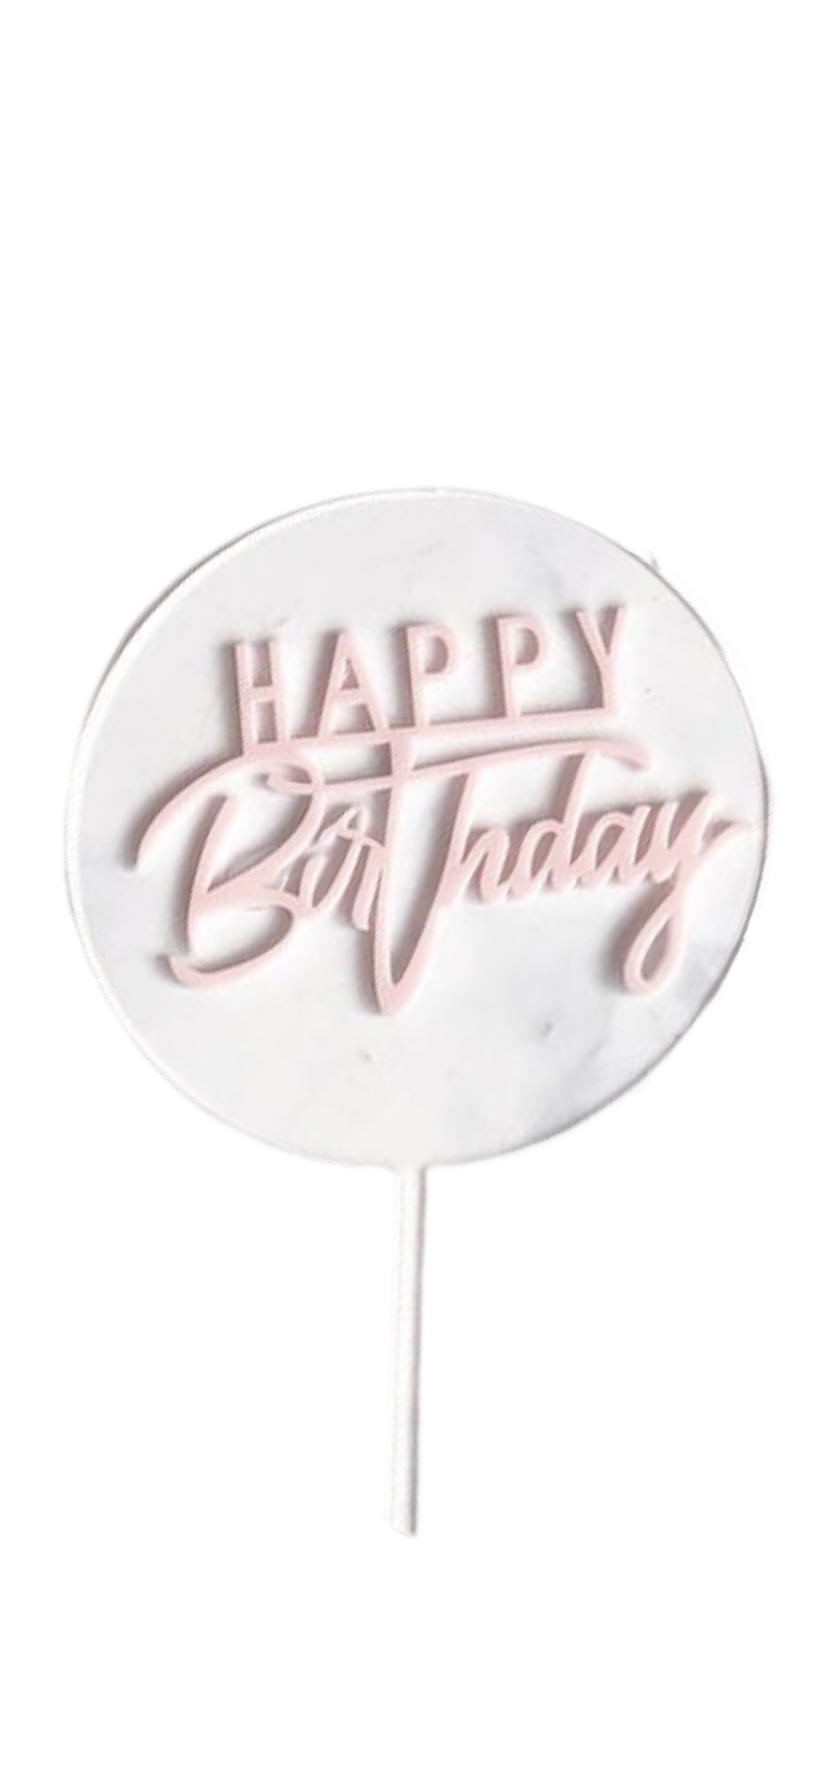 Acrylic Cake Topper Clear with Pink Happy Birthday Overlay - The Cooks Cupboard Ltd